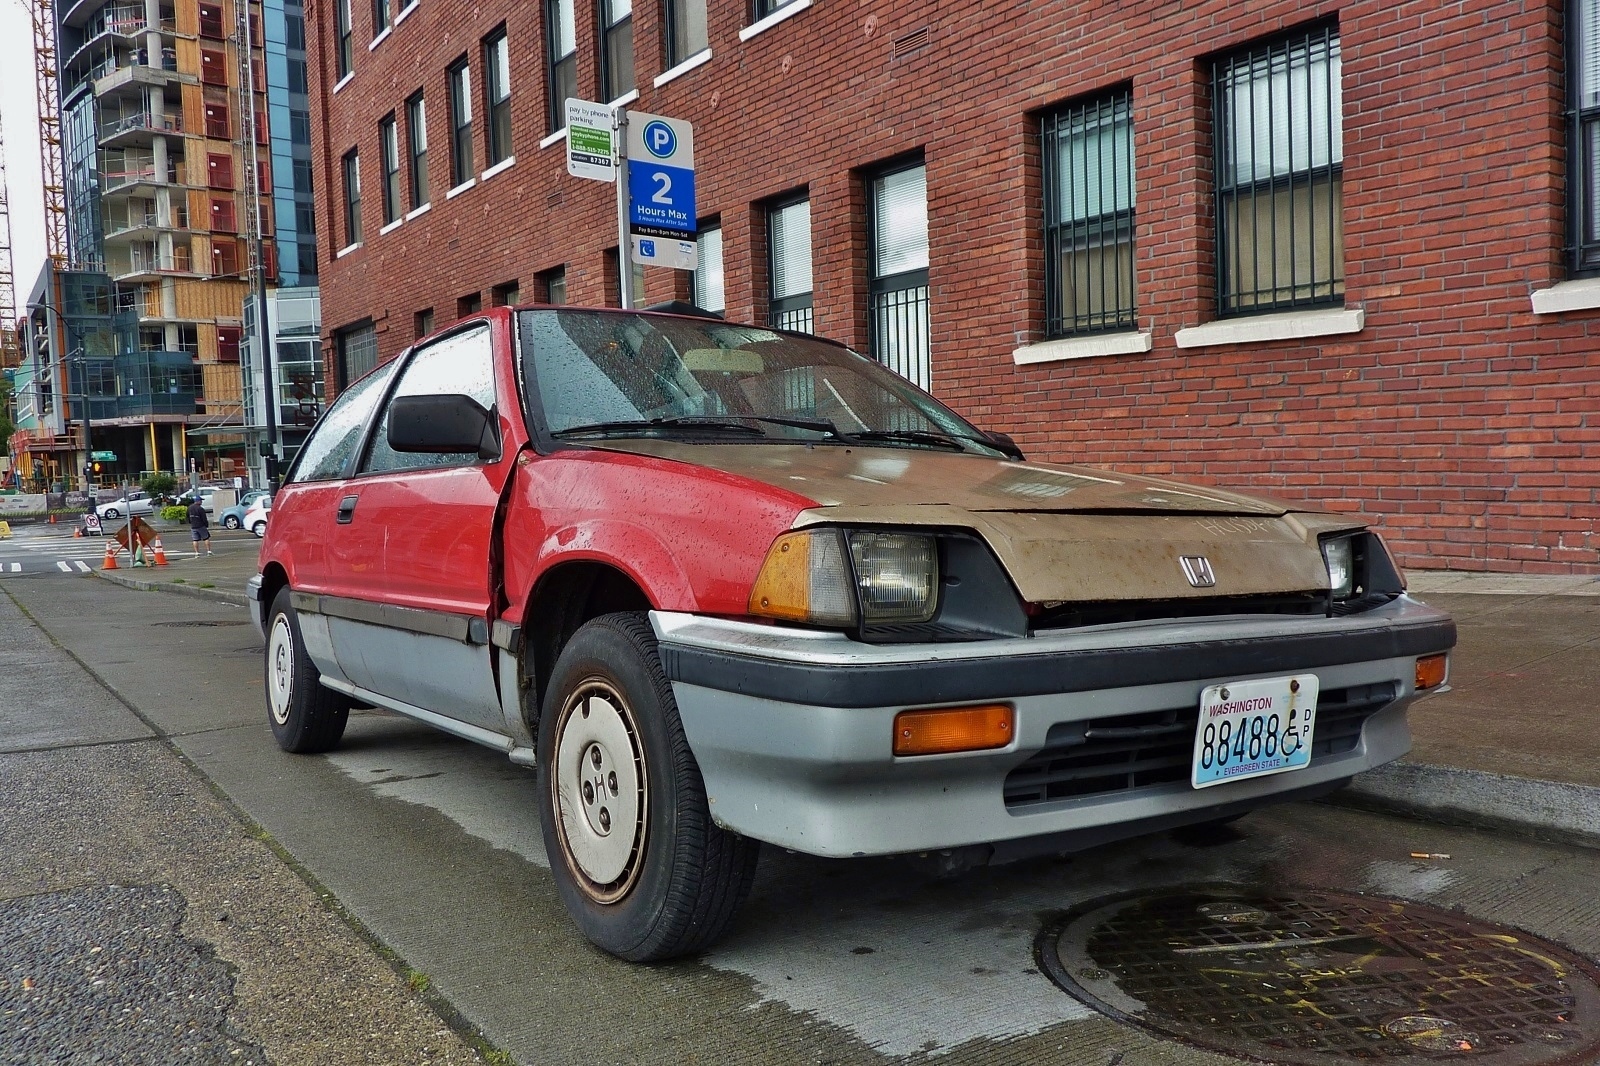 Seattle S Parked Cars August 2014